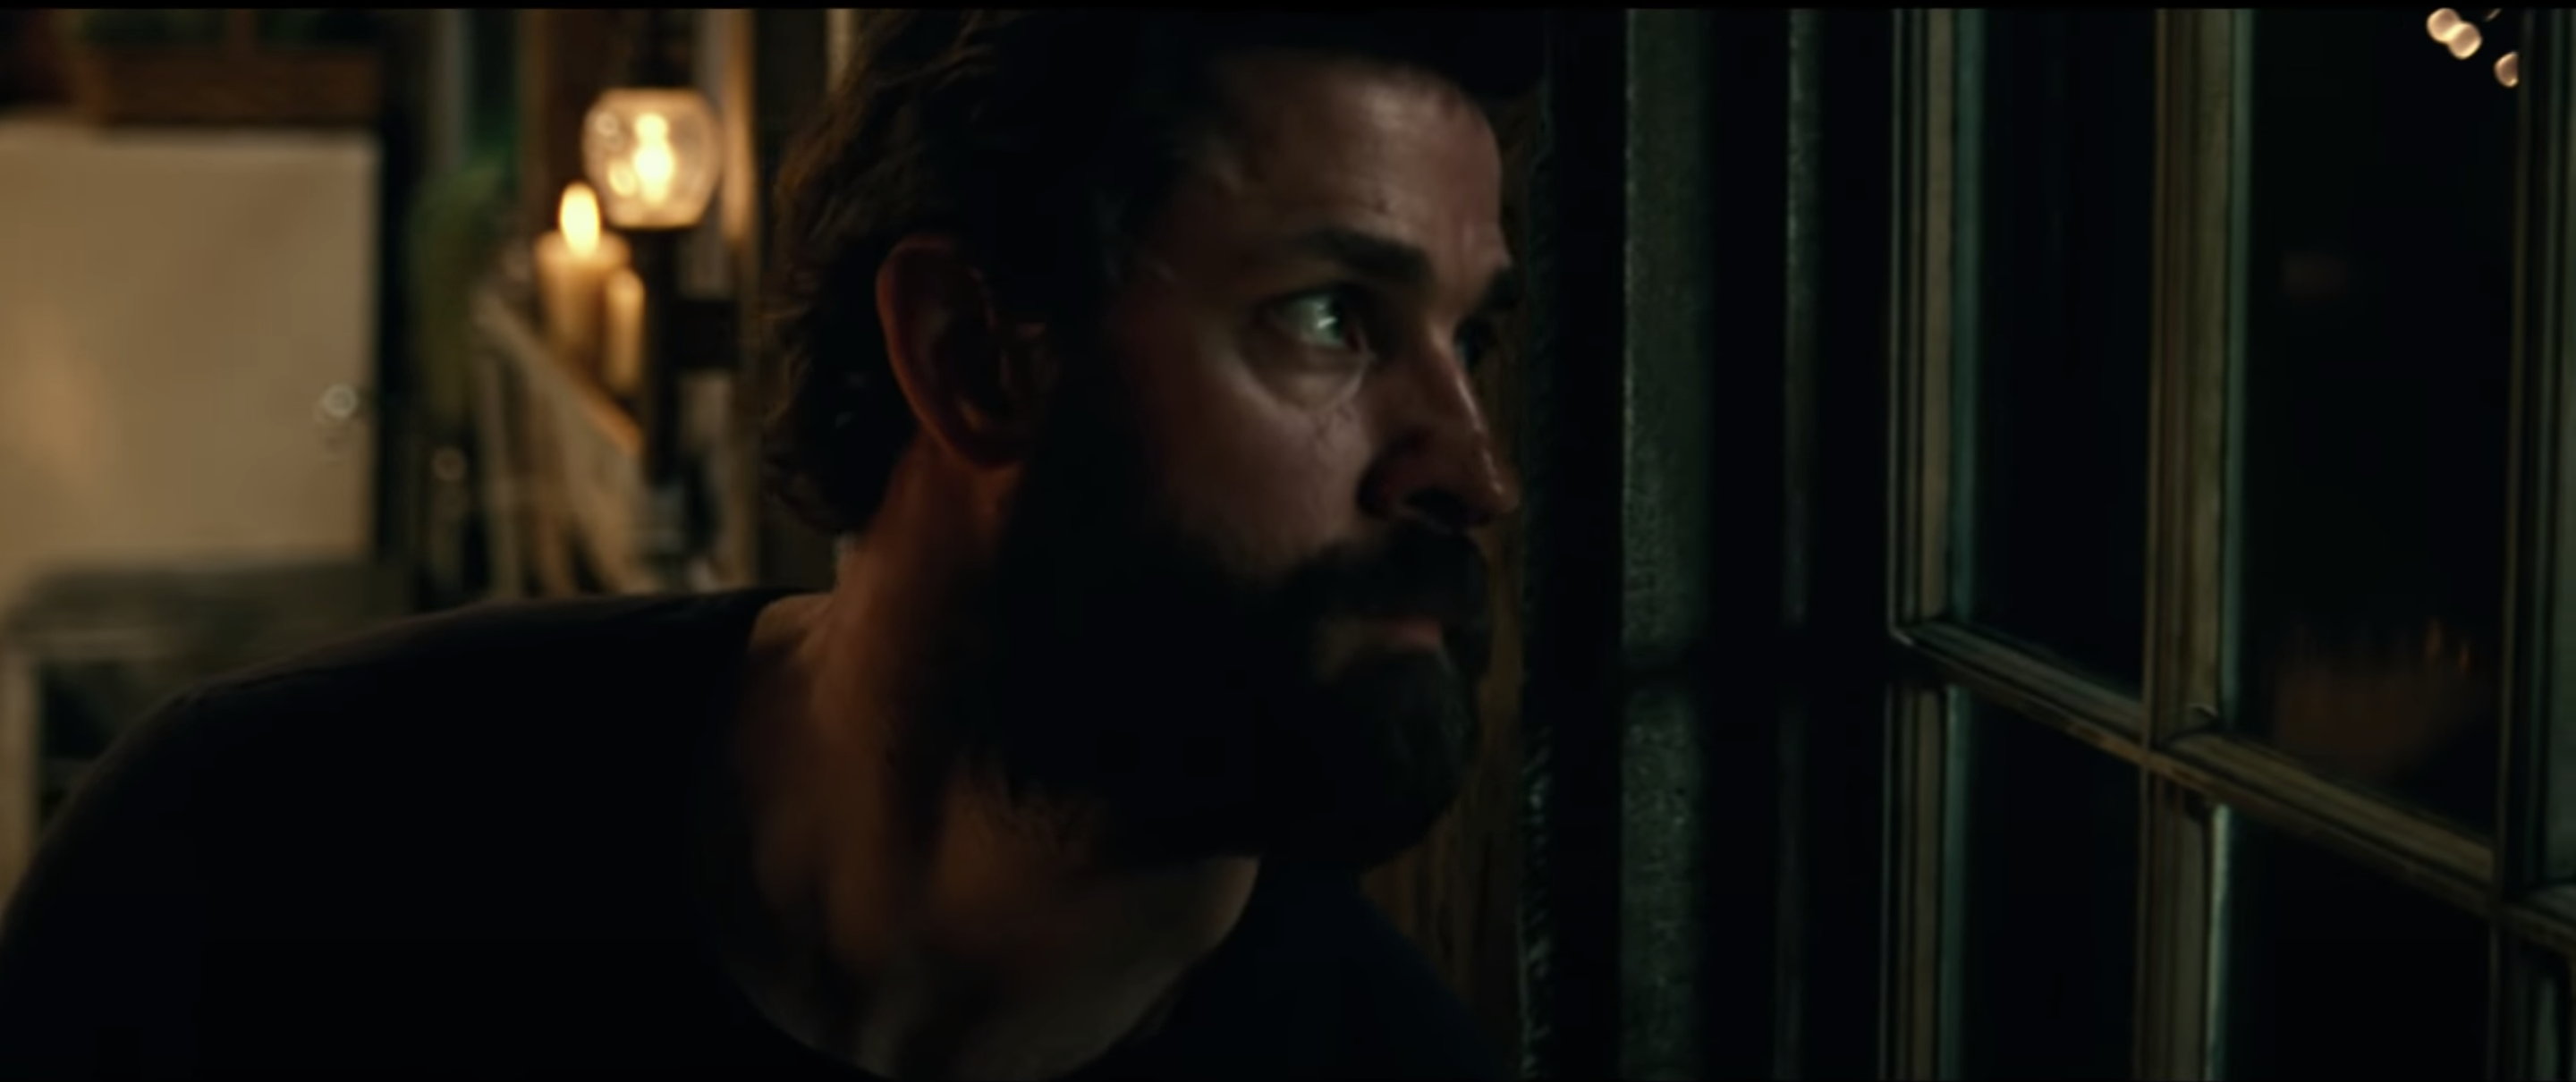 Shot from the movie A Quiet Place, made in 2018